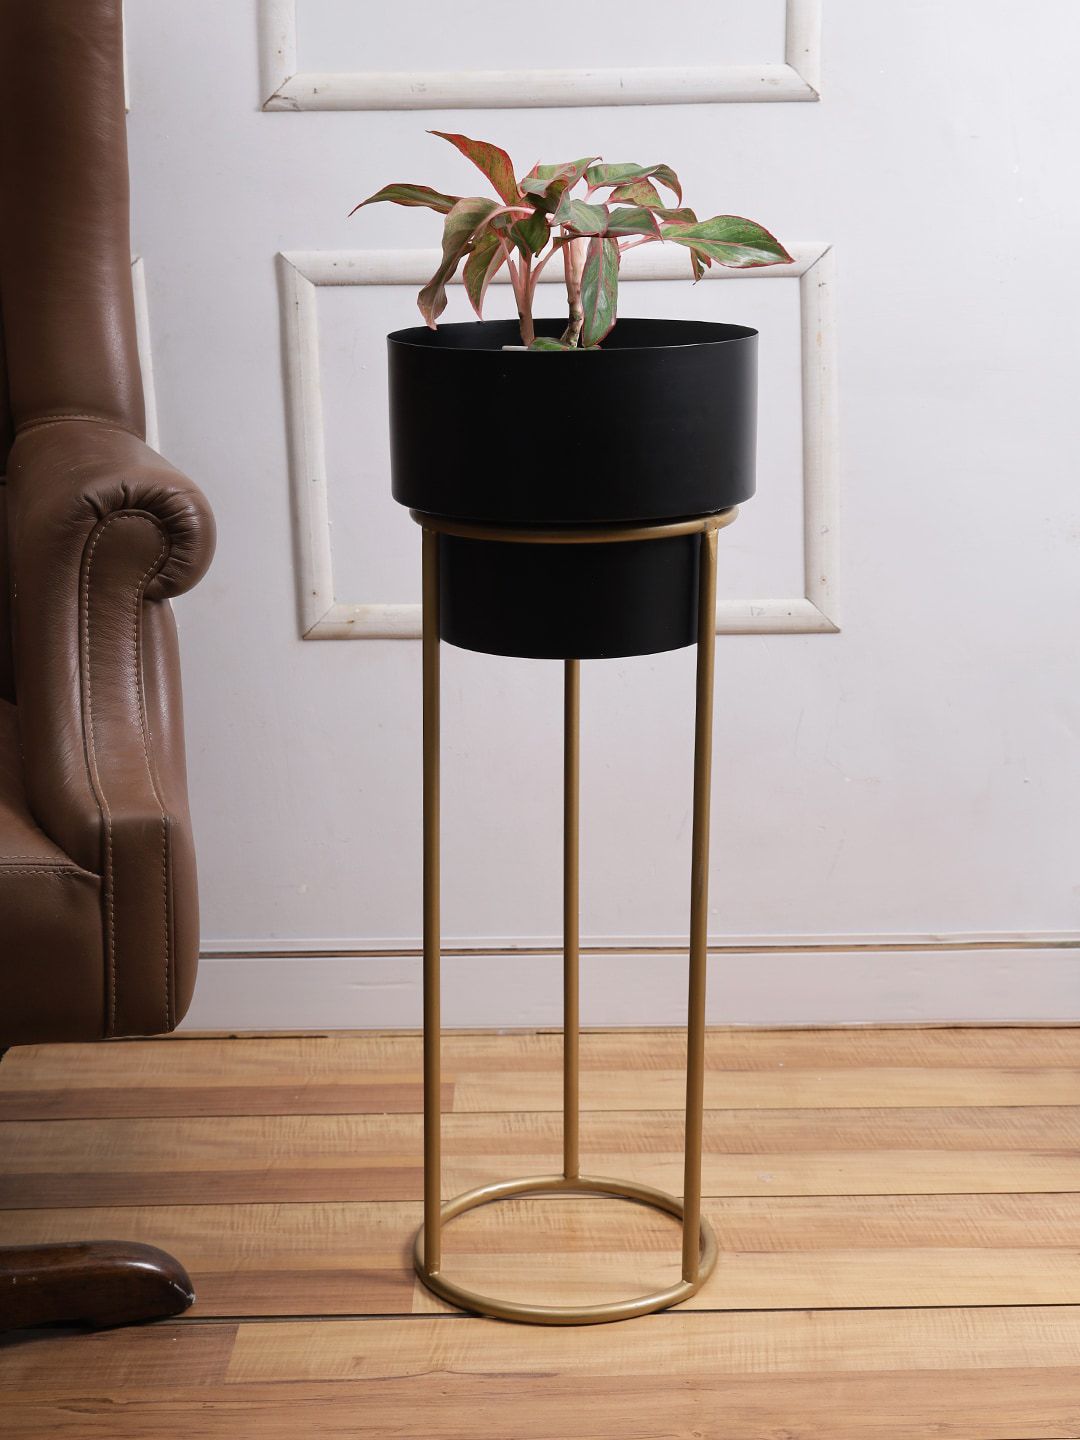 Aapno Rajasthan Black Solid Metal Planter Pot with Stand Price in India